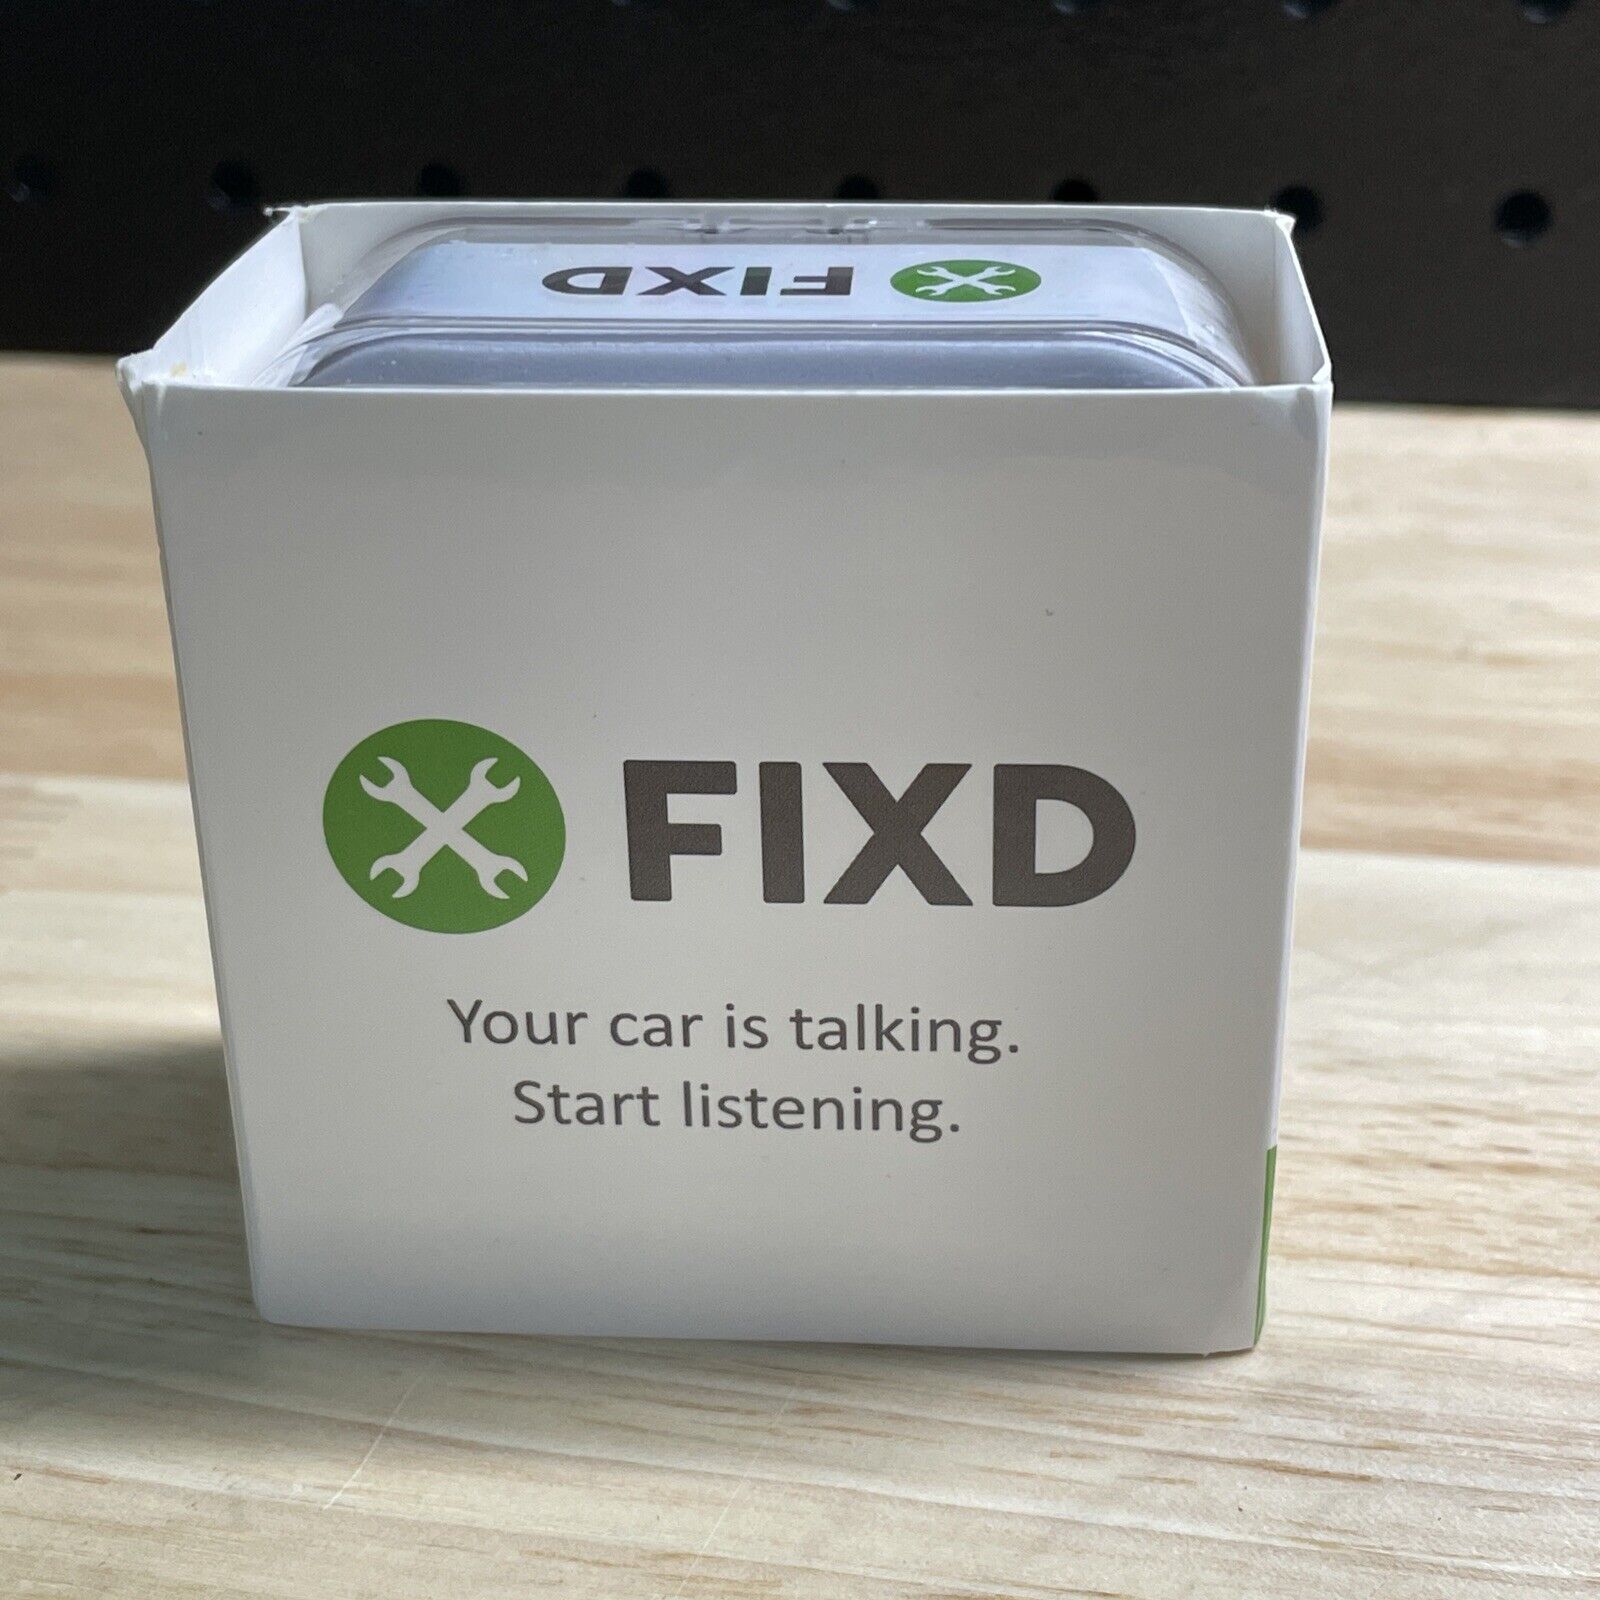 FIXD Wireless OBD2 Active Car Health Monitor / Diagnostic Scanner for iOS